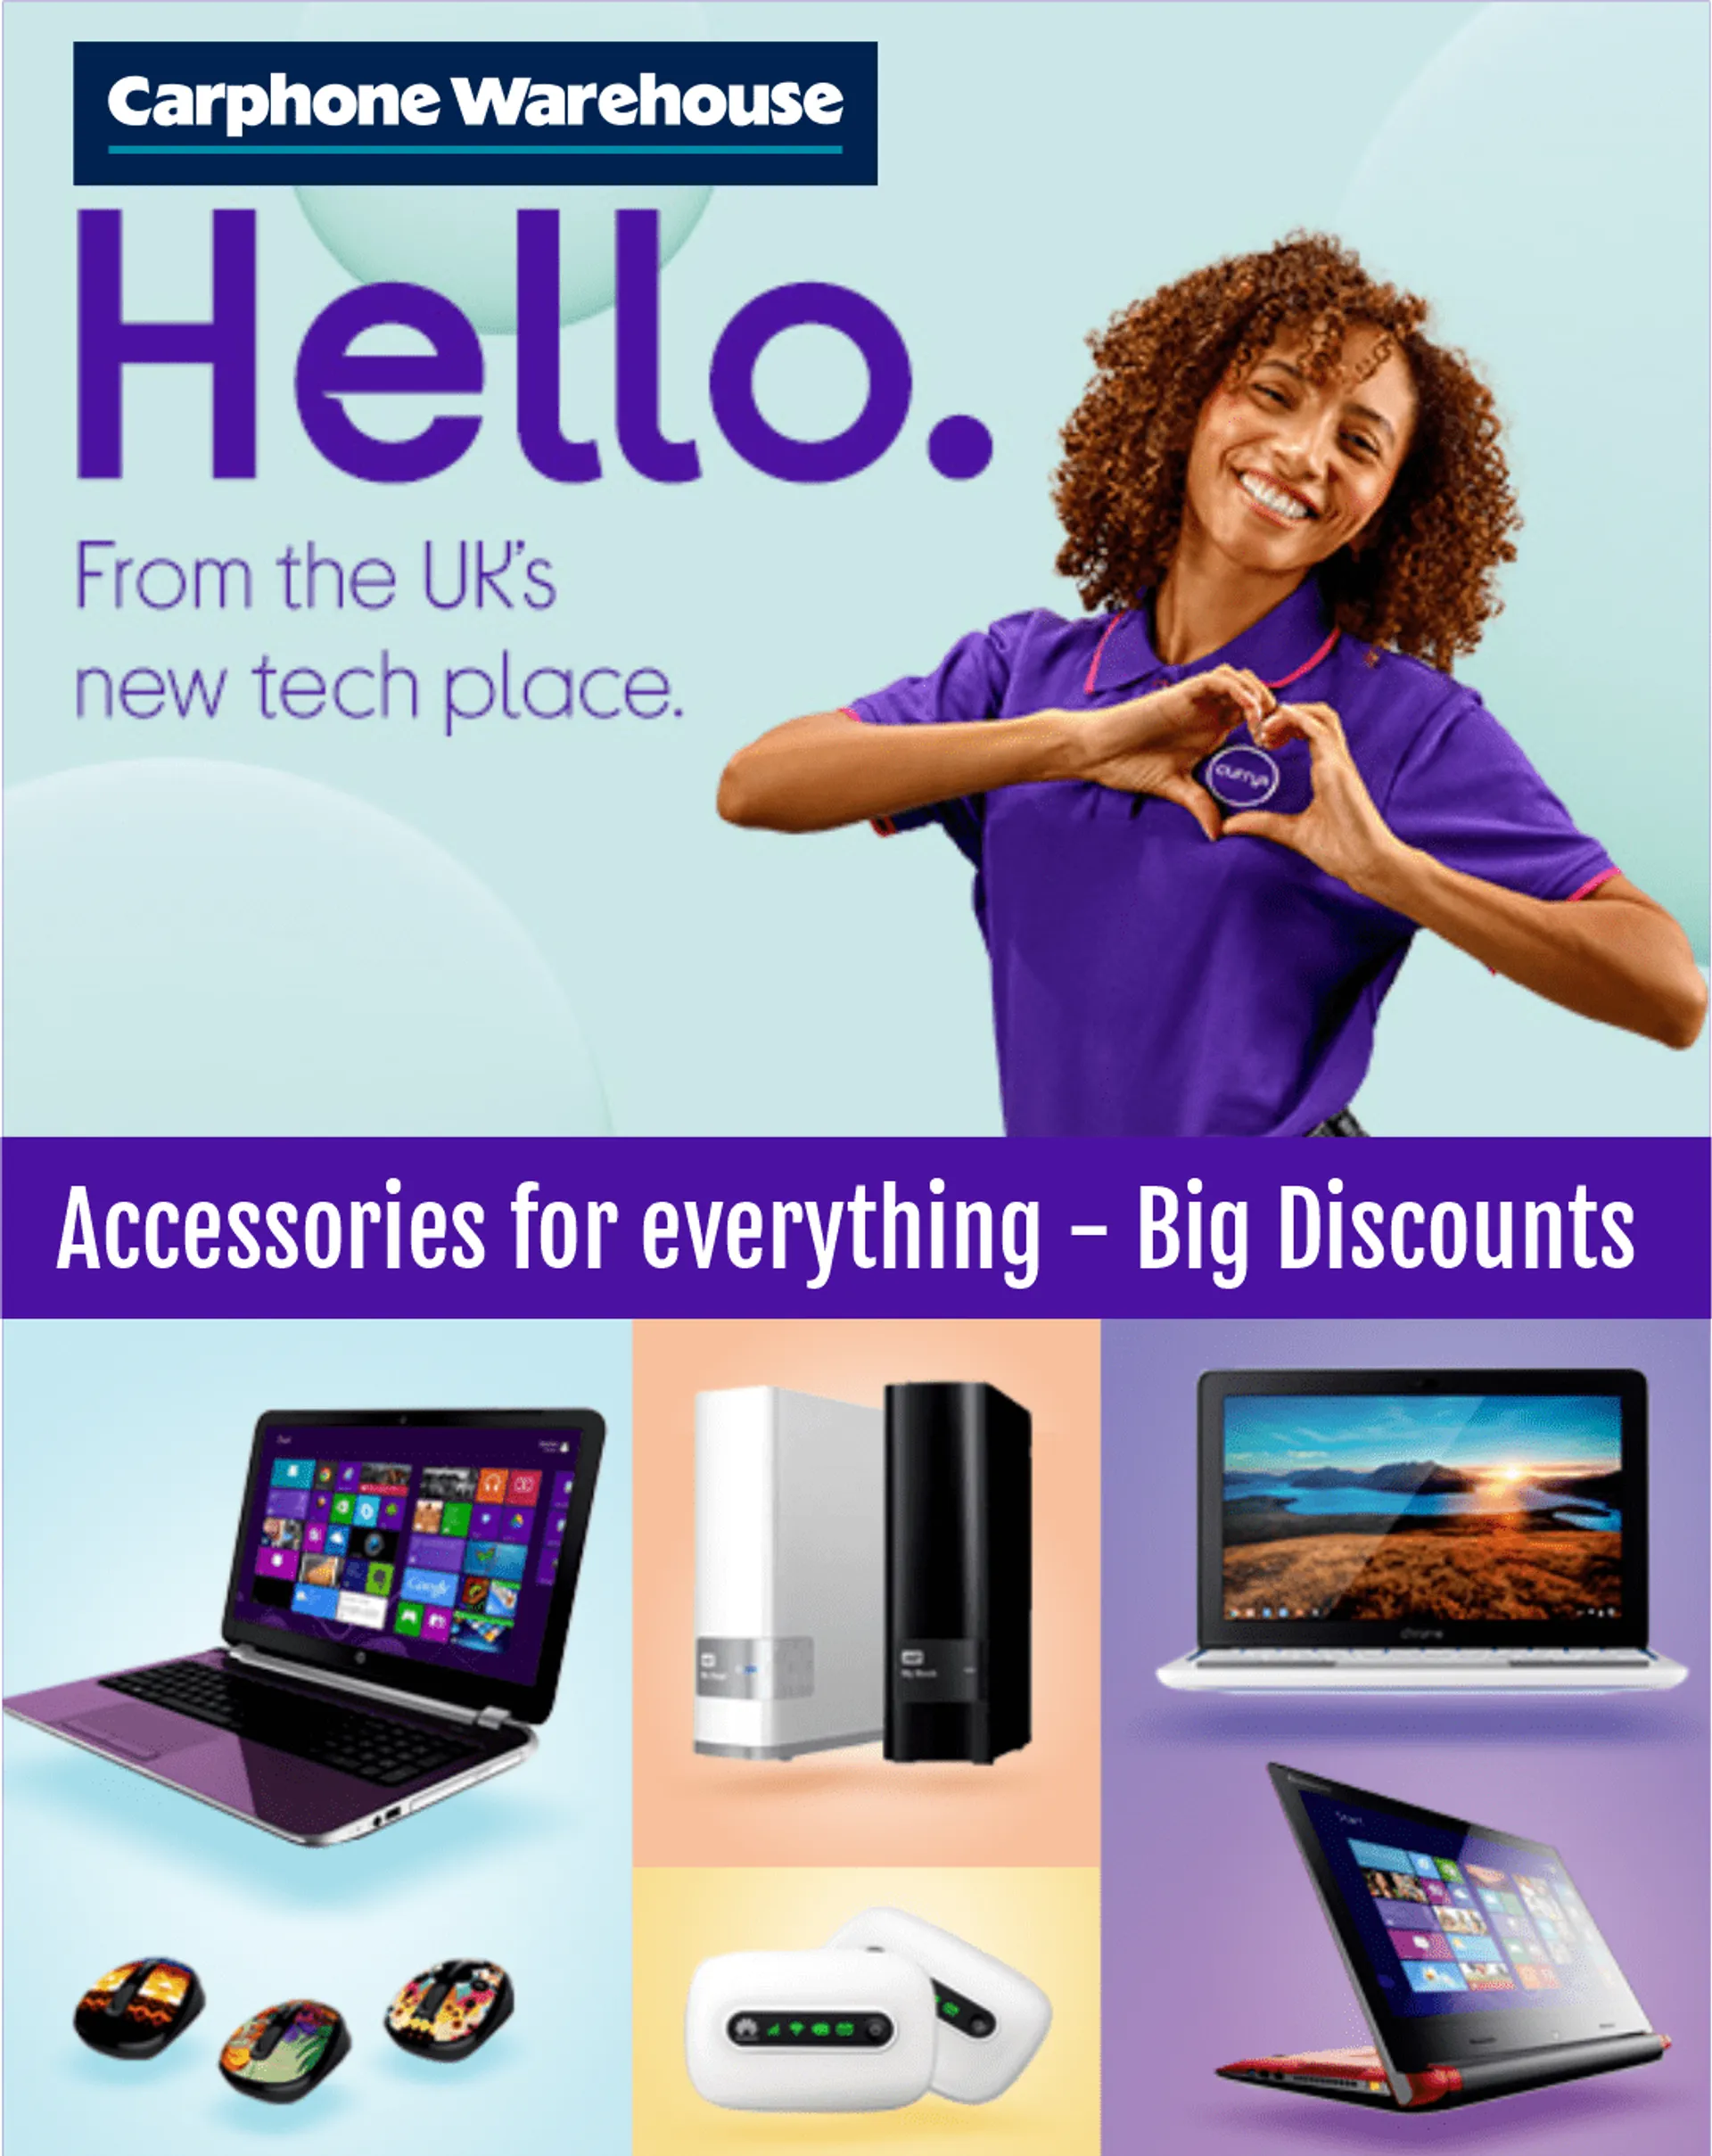 Carphone Warehouse - Accessories for everything